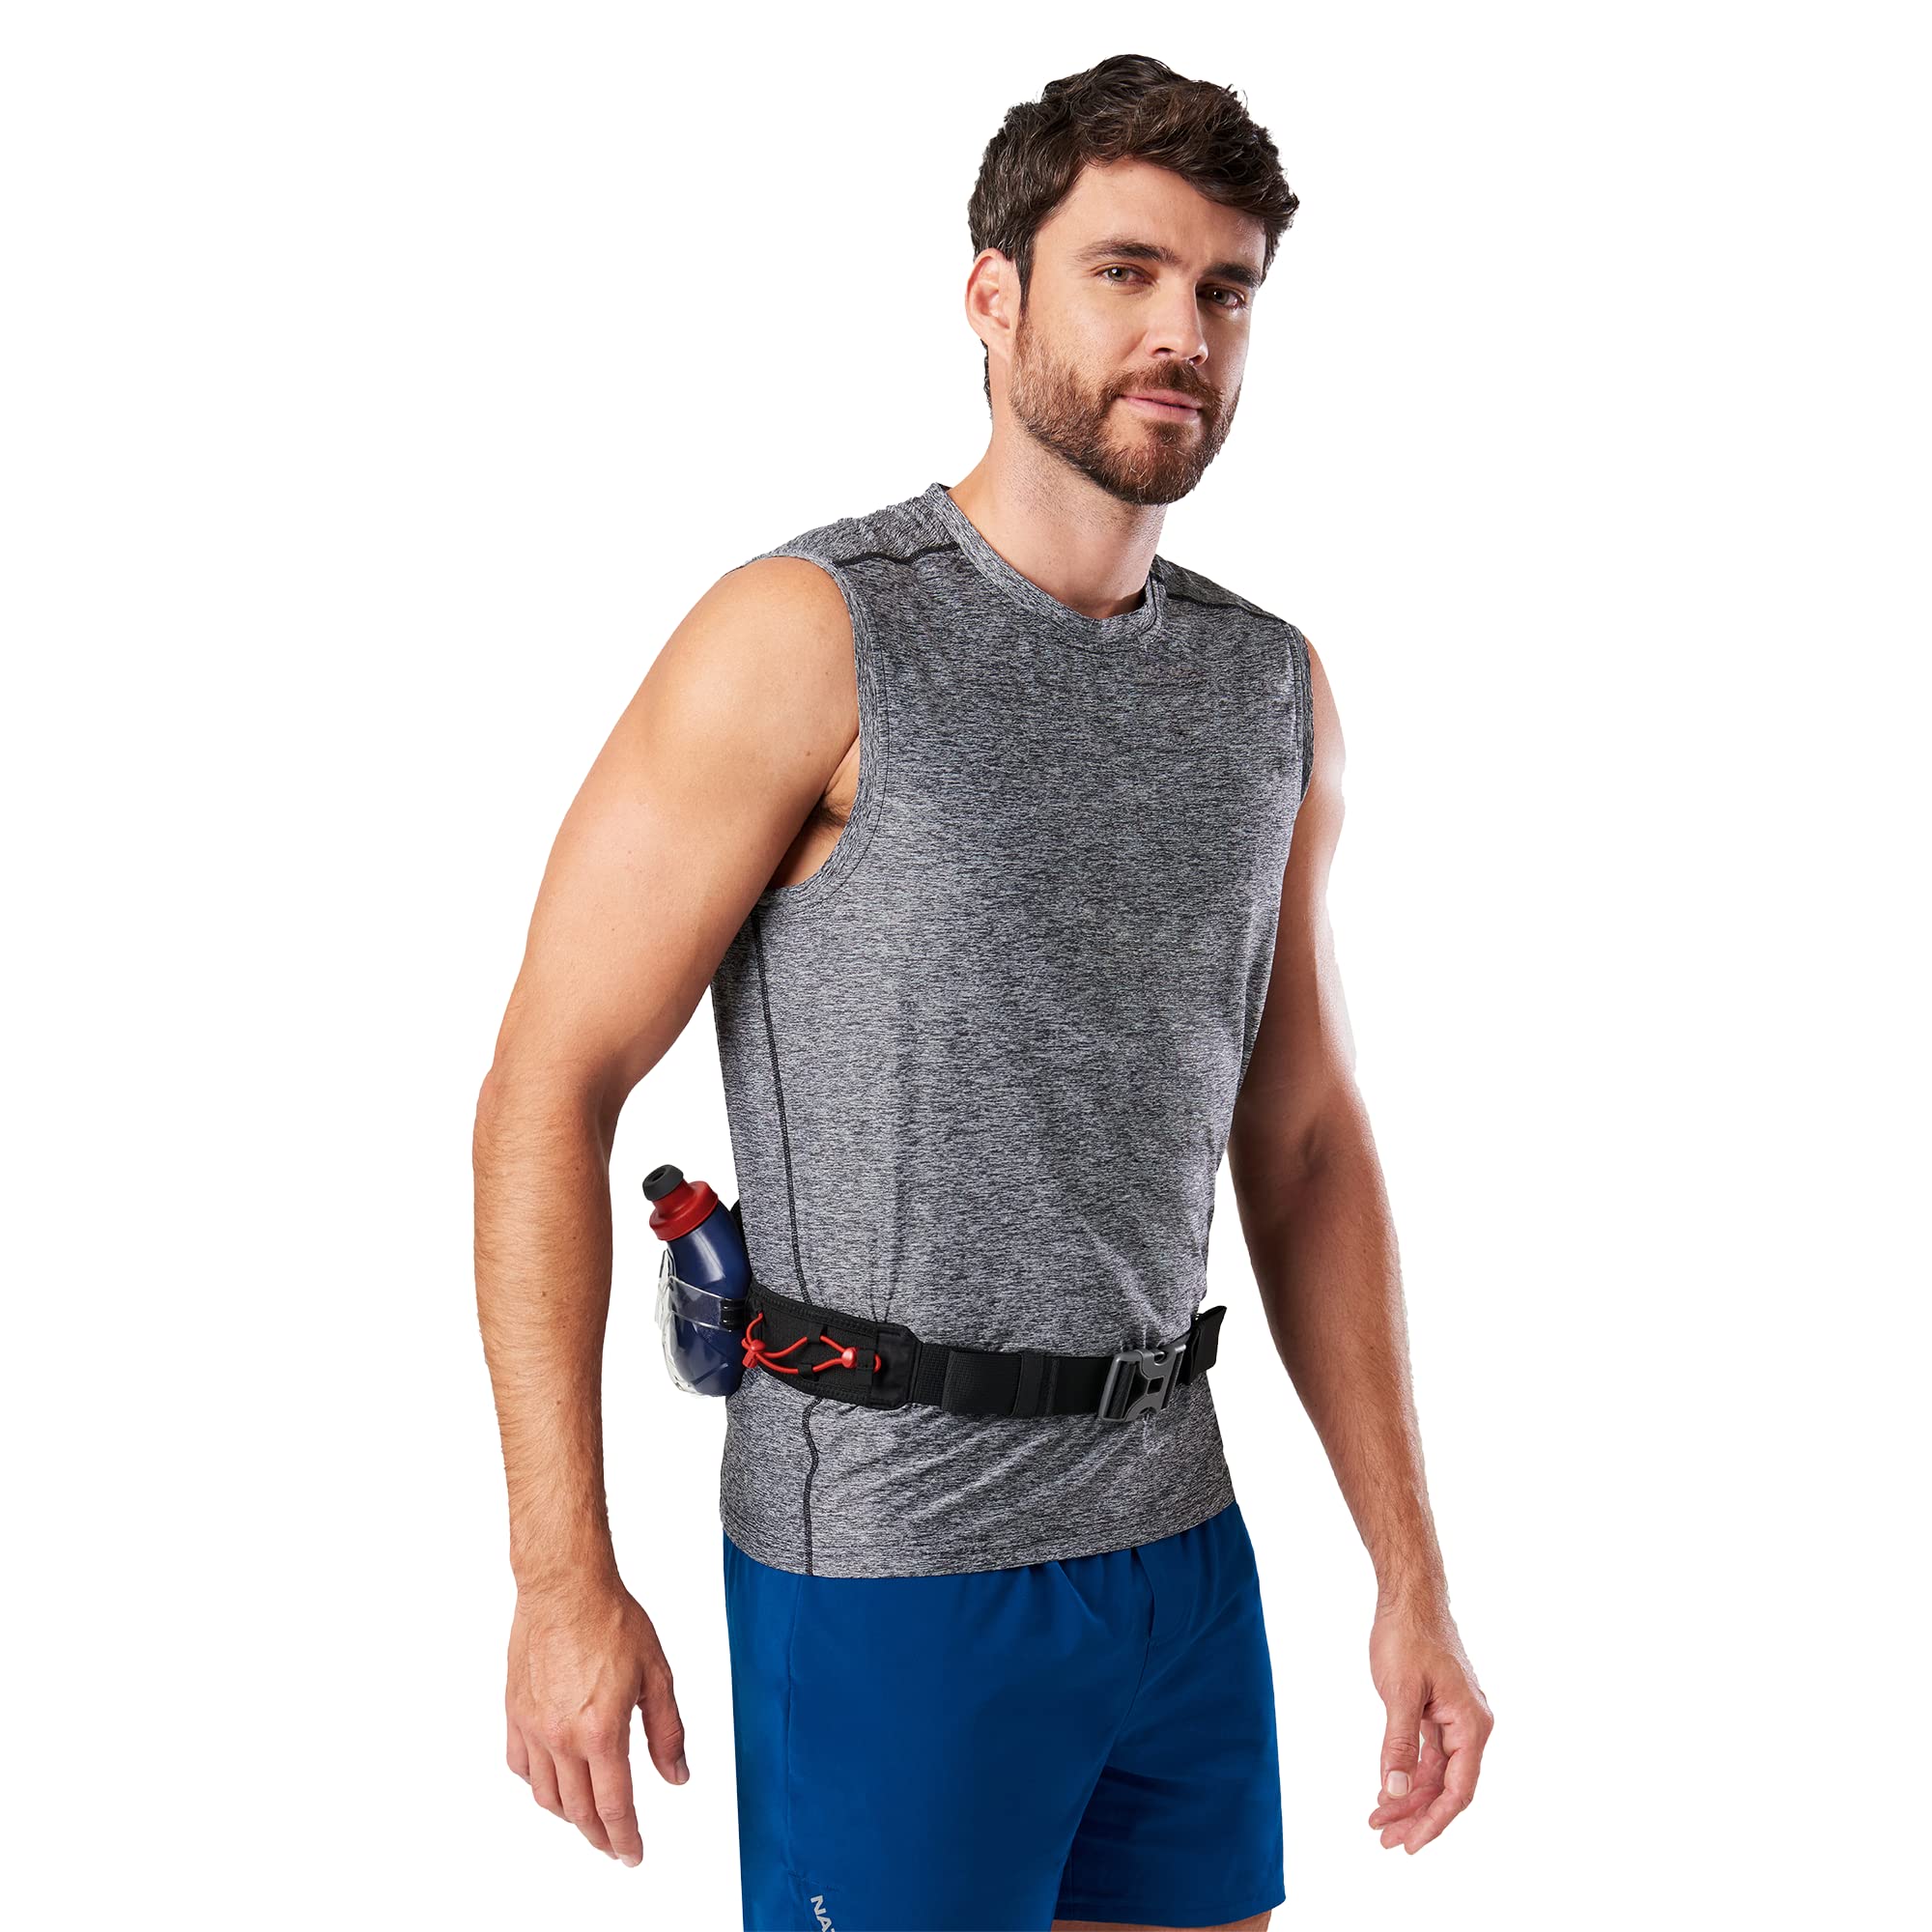 Nathan Hydration Running Belt with Flasks and Storage Pockets. Trail Mix Plus.